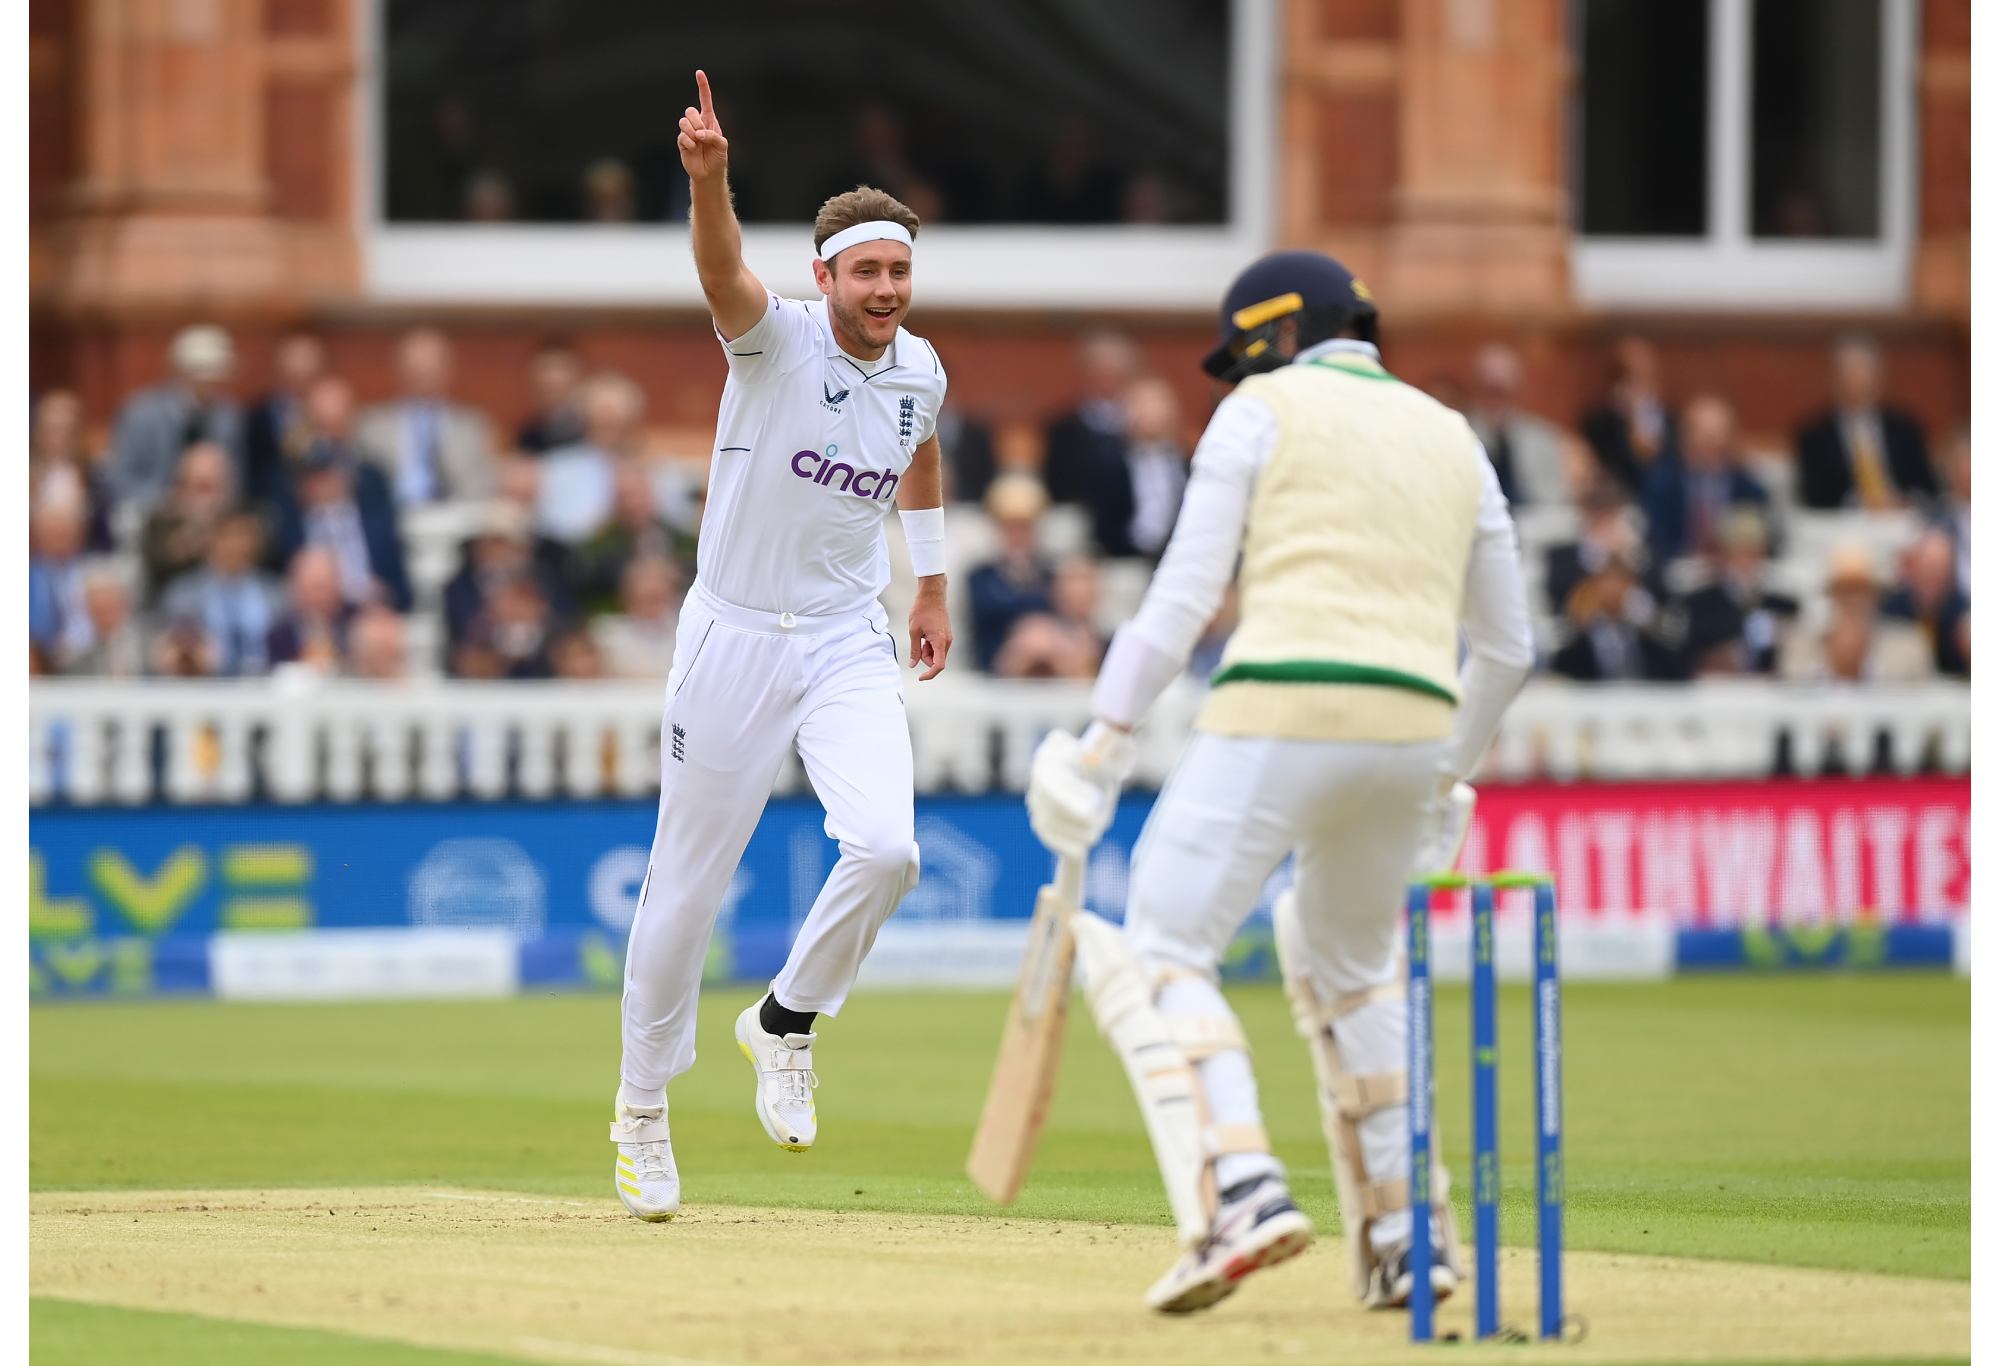 LONDON, ENGLAND - JUNE 01: Stuart Broad of England celebrates taking the wicket of Peter Moor of Ireland during Day One of the LV= Insurance Test Match between England and Ireland at Lord's Cricket Ground on June 01, 2023 in London, England. (Photo by Alex Davidson/Getty Images)